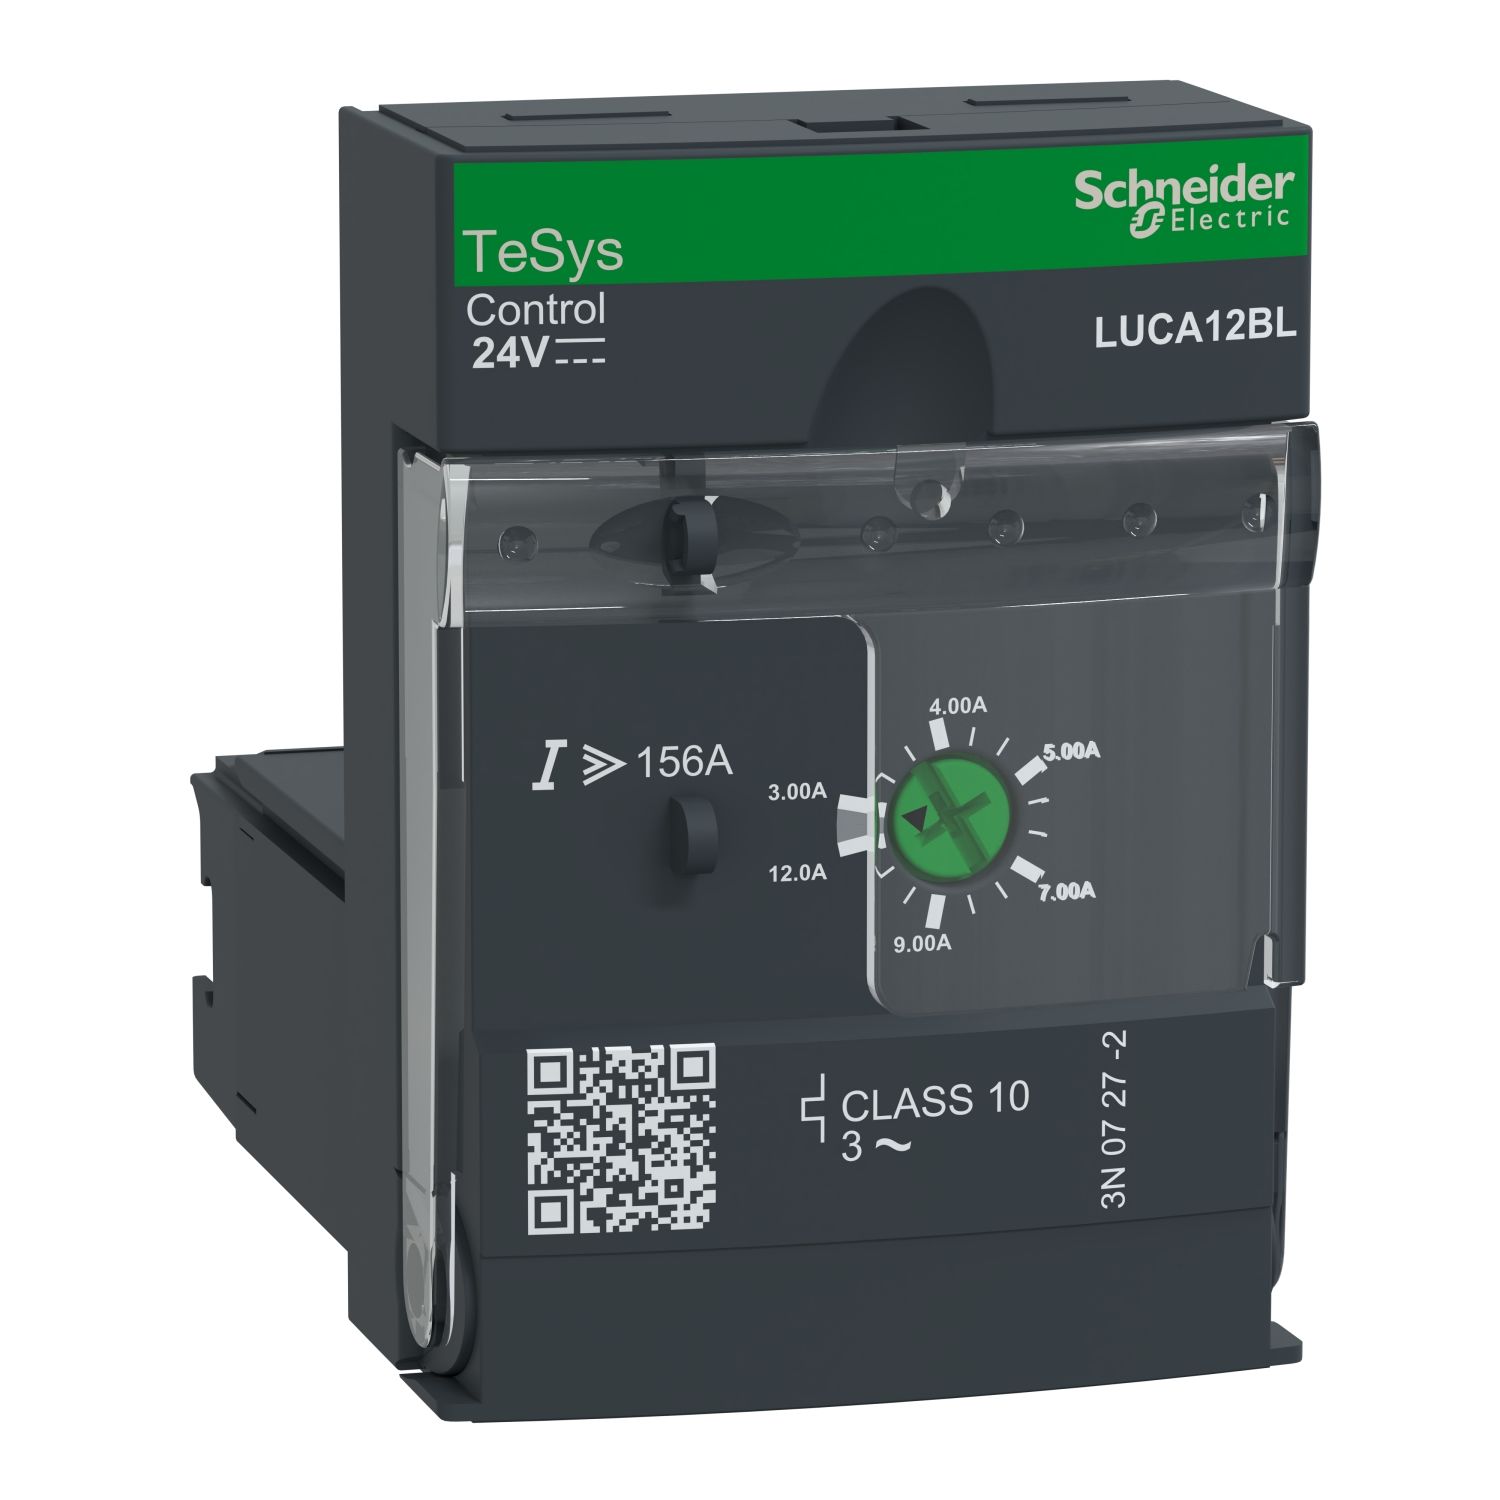 LUCA12BL Standard control unit, TeSys Ultra, 3P, 3 to 12A, 690VAC, thermal magnetic protection, class 10, 24VDC coil